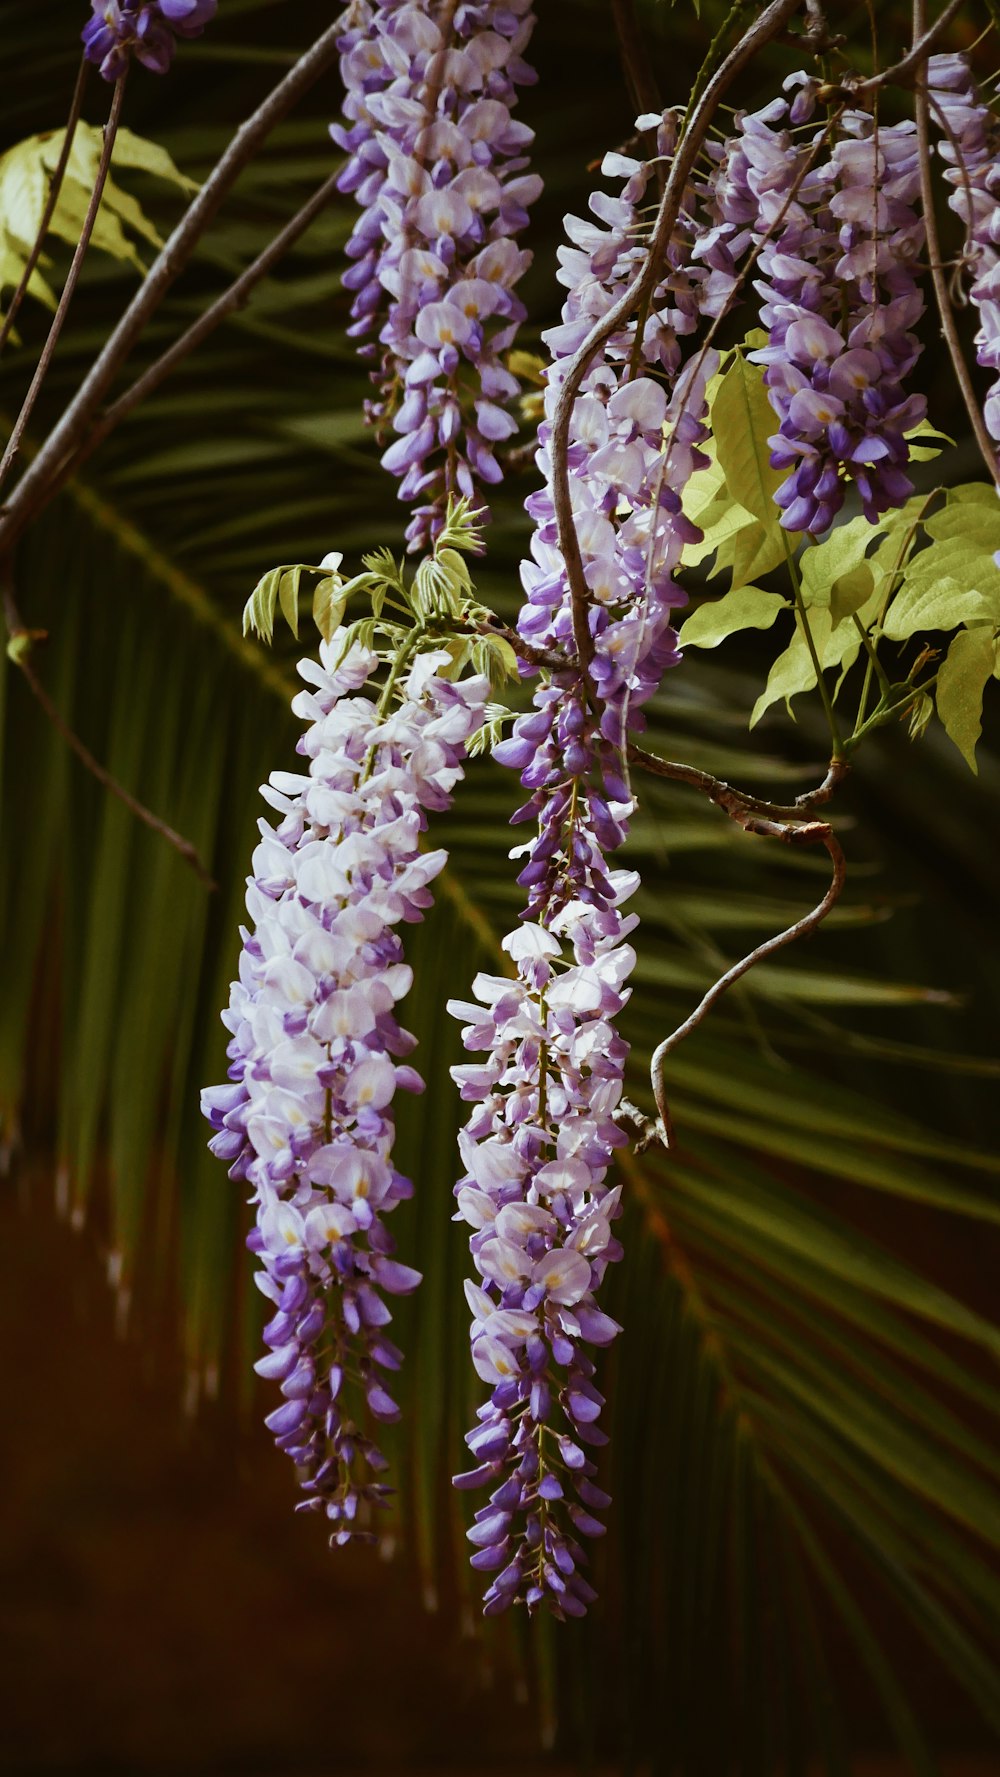 white and purple clustered petaled flowers